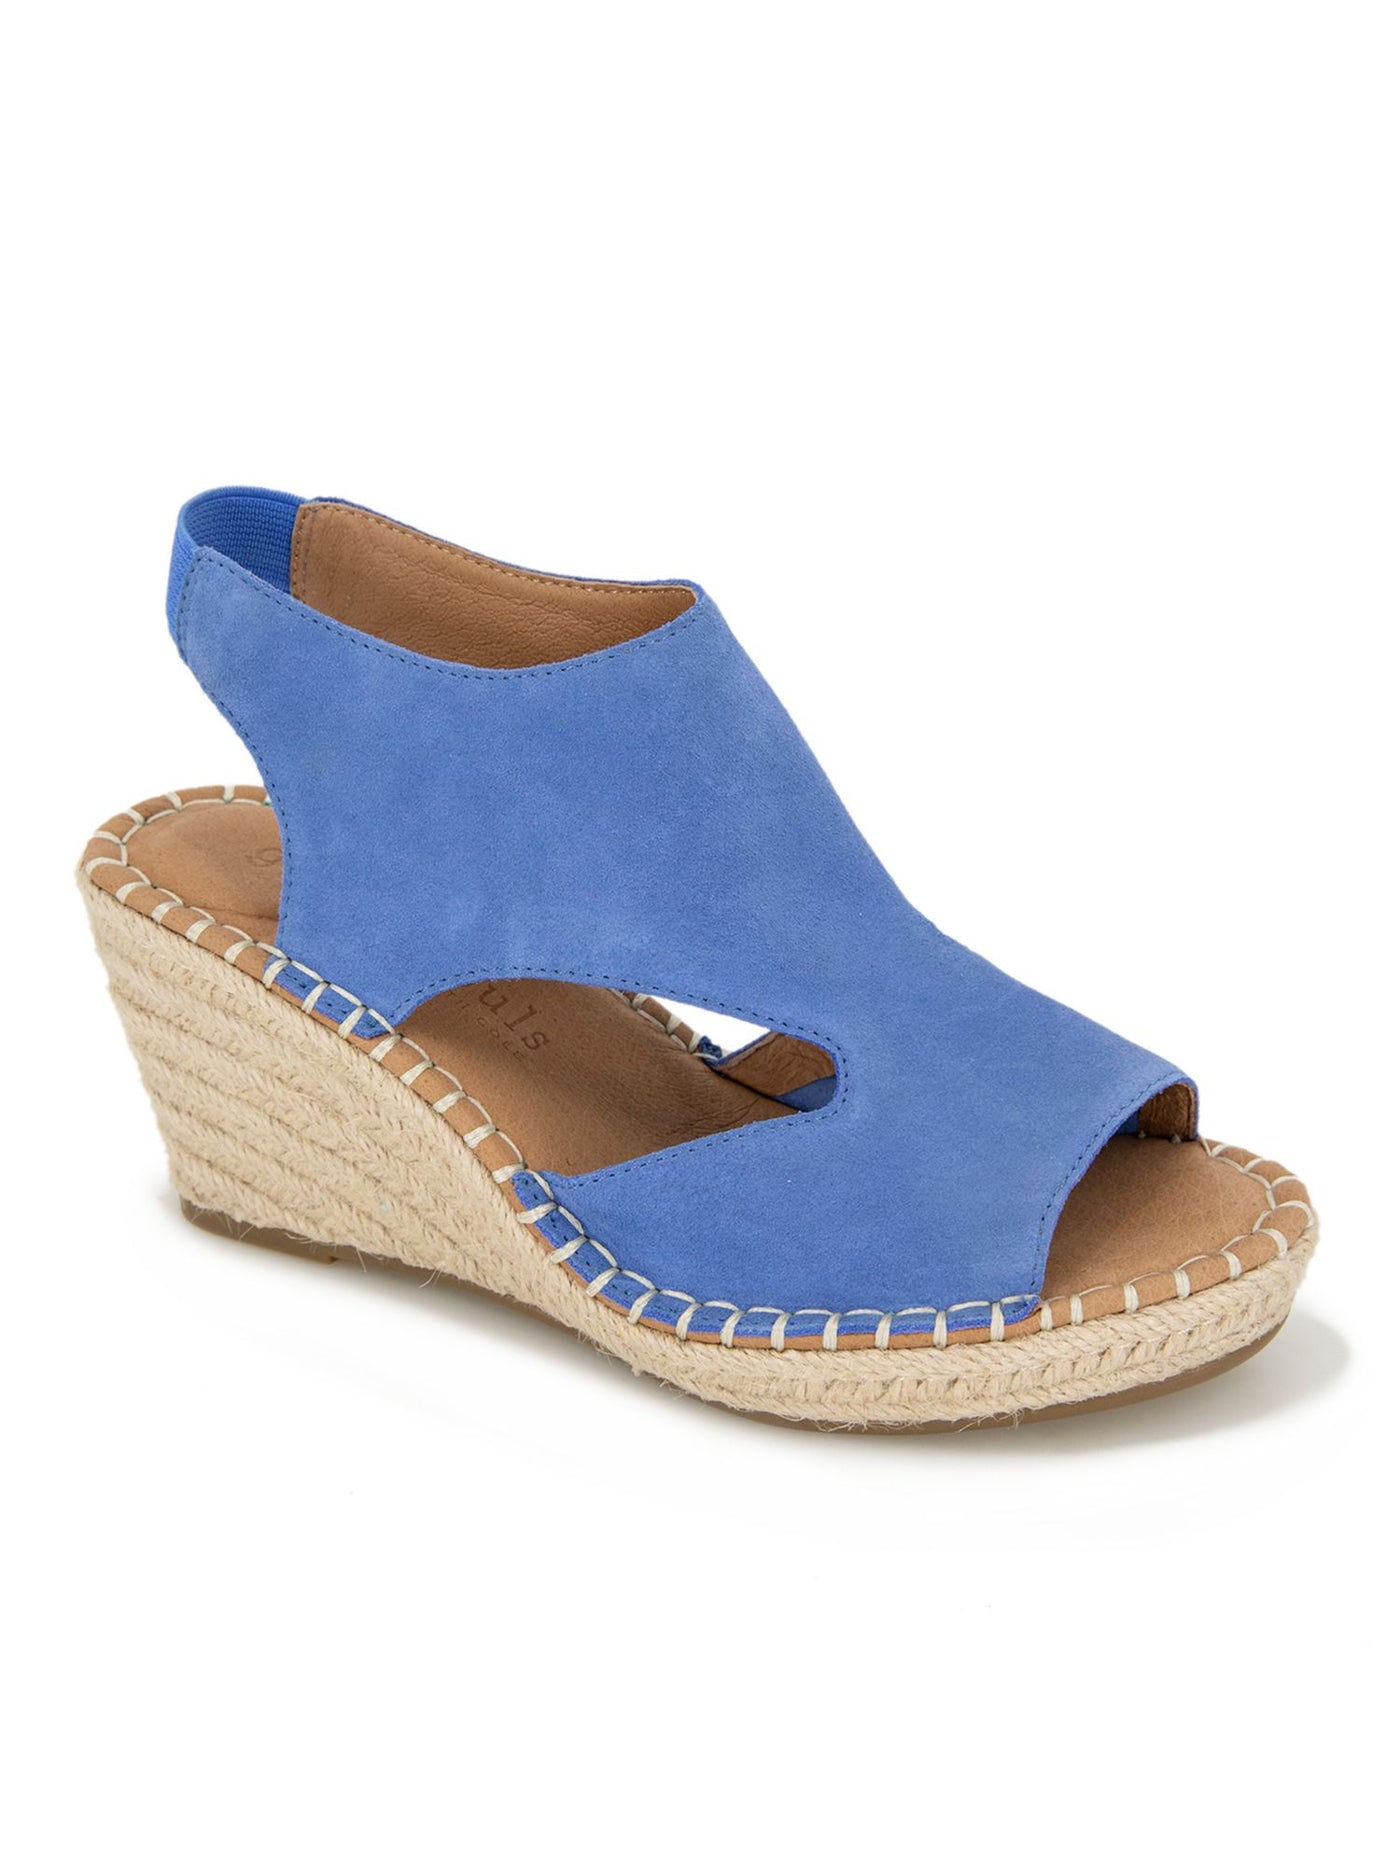 GENTLE SOULS KENNETH COLE Womens Blue Goring Padded Cody Open Toe Wedge Slip On Leather Espadrille Shoes 8.5 M